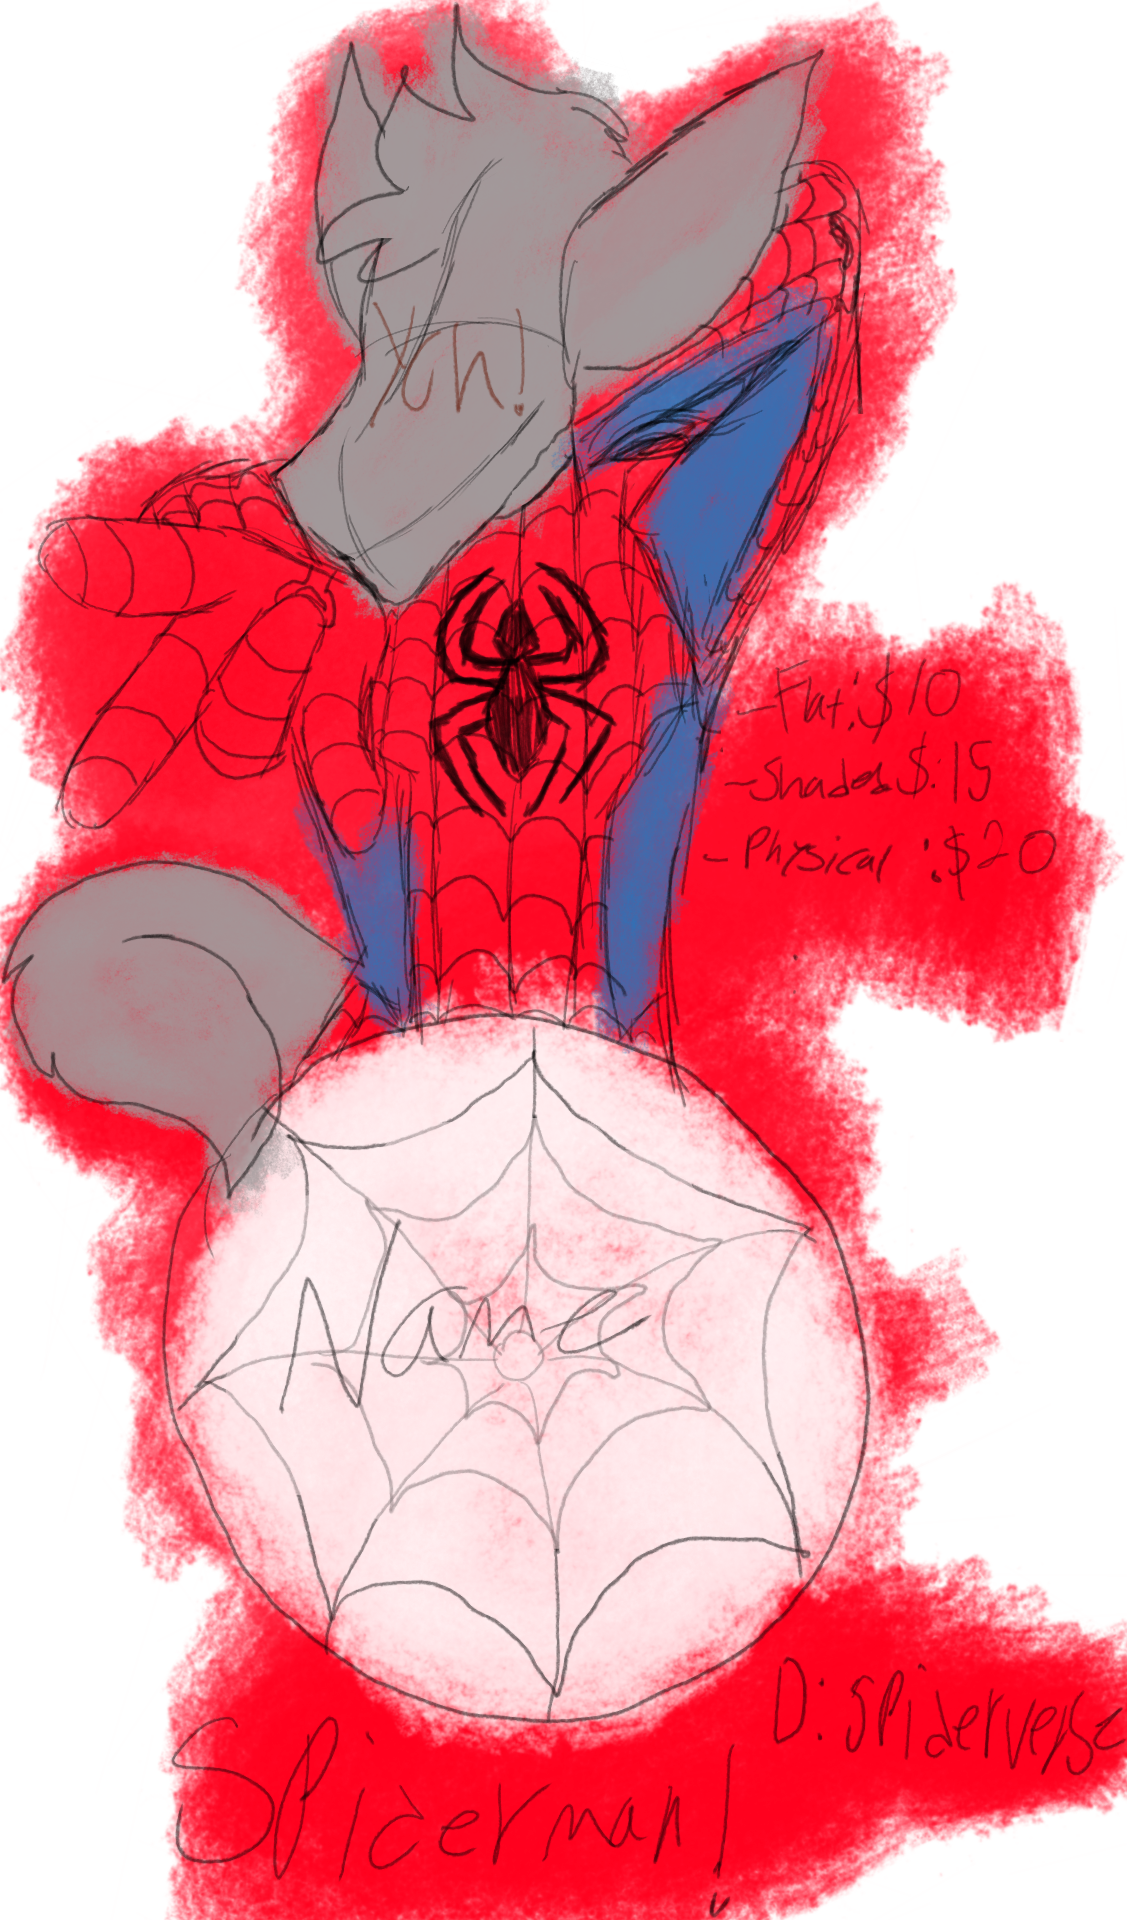 YCH - SPIDERSONA PAGE ART - 4 poses - YCH.Commishes